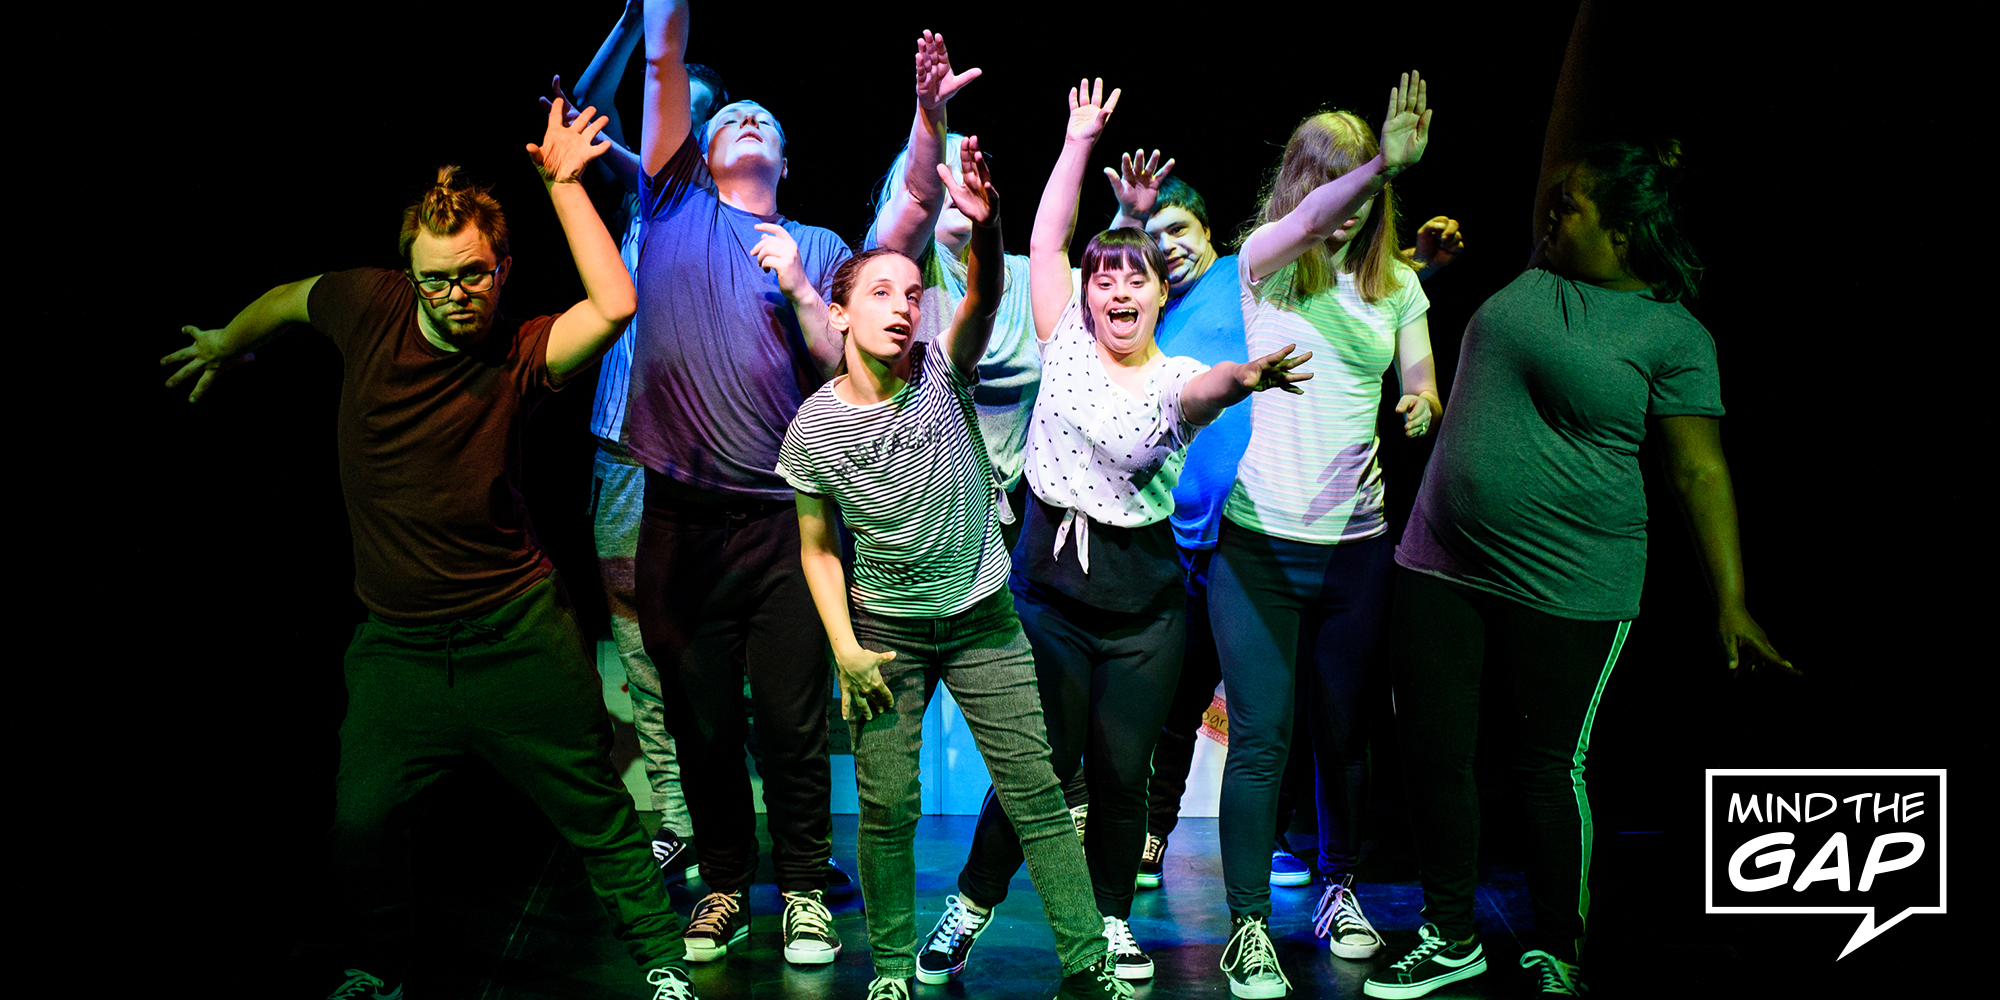 Theatre performers on stage reaching into the audience, with the Mind The Gap logo in the bottom right